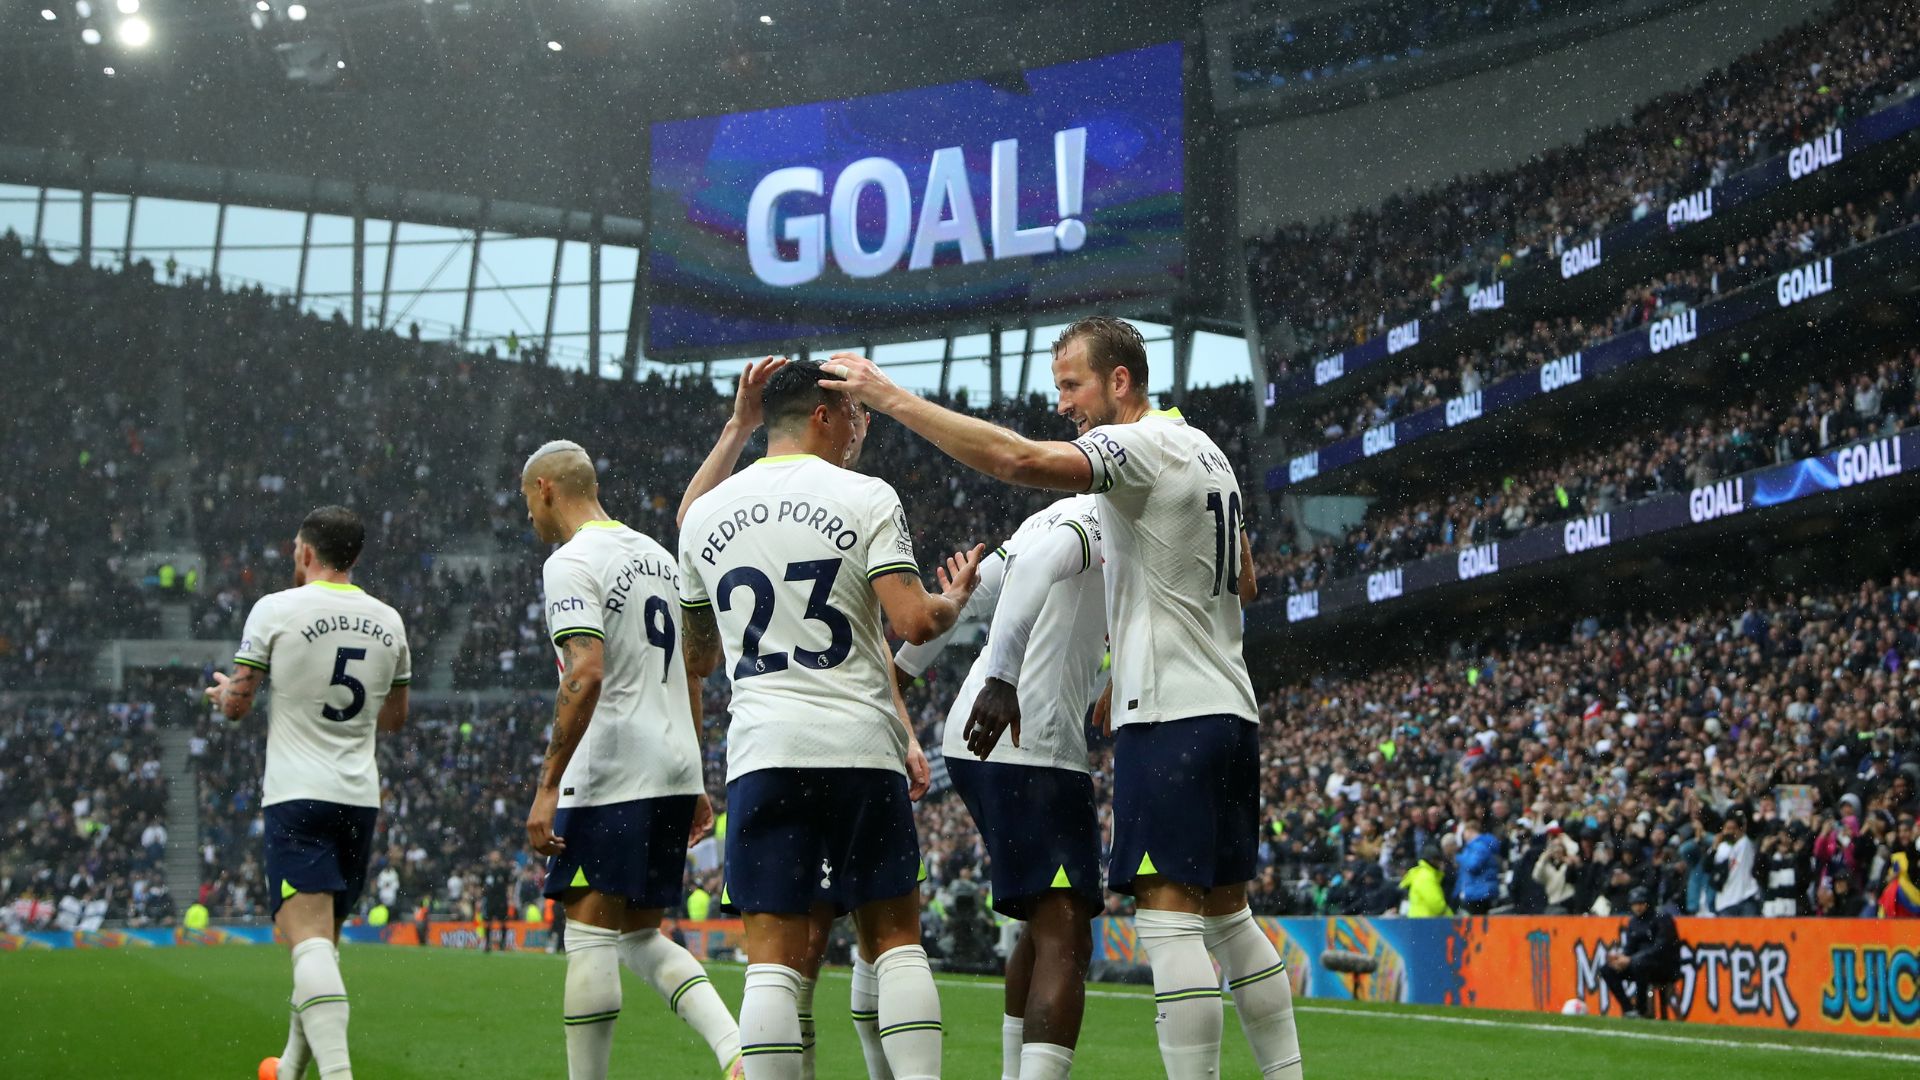 Tottenham win with goal from Harry Kane (Credit: Getty Images)